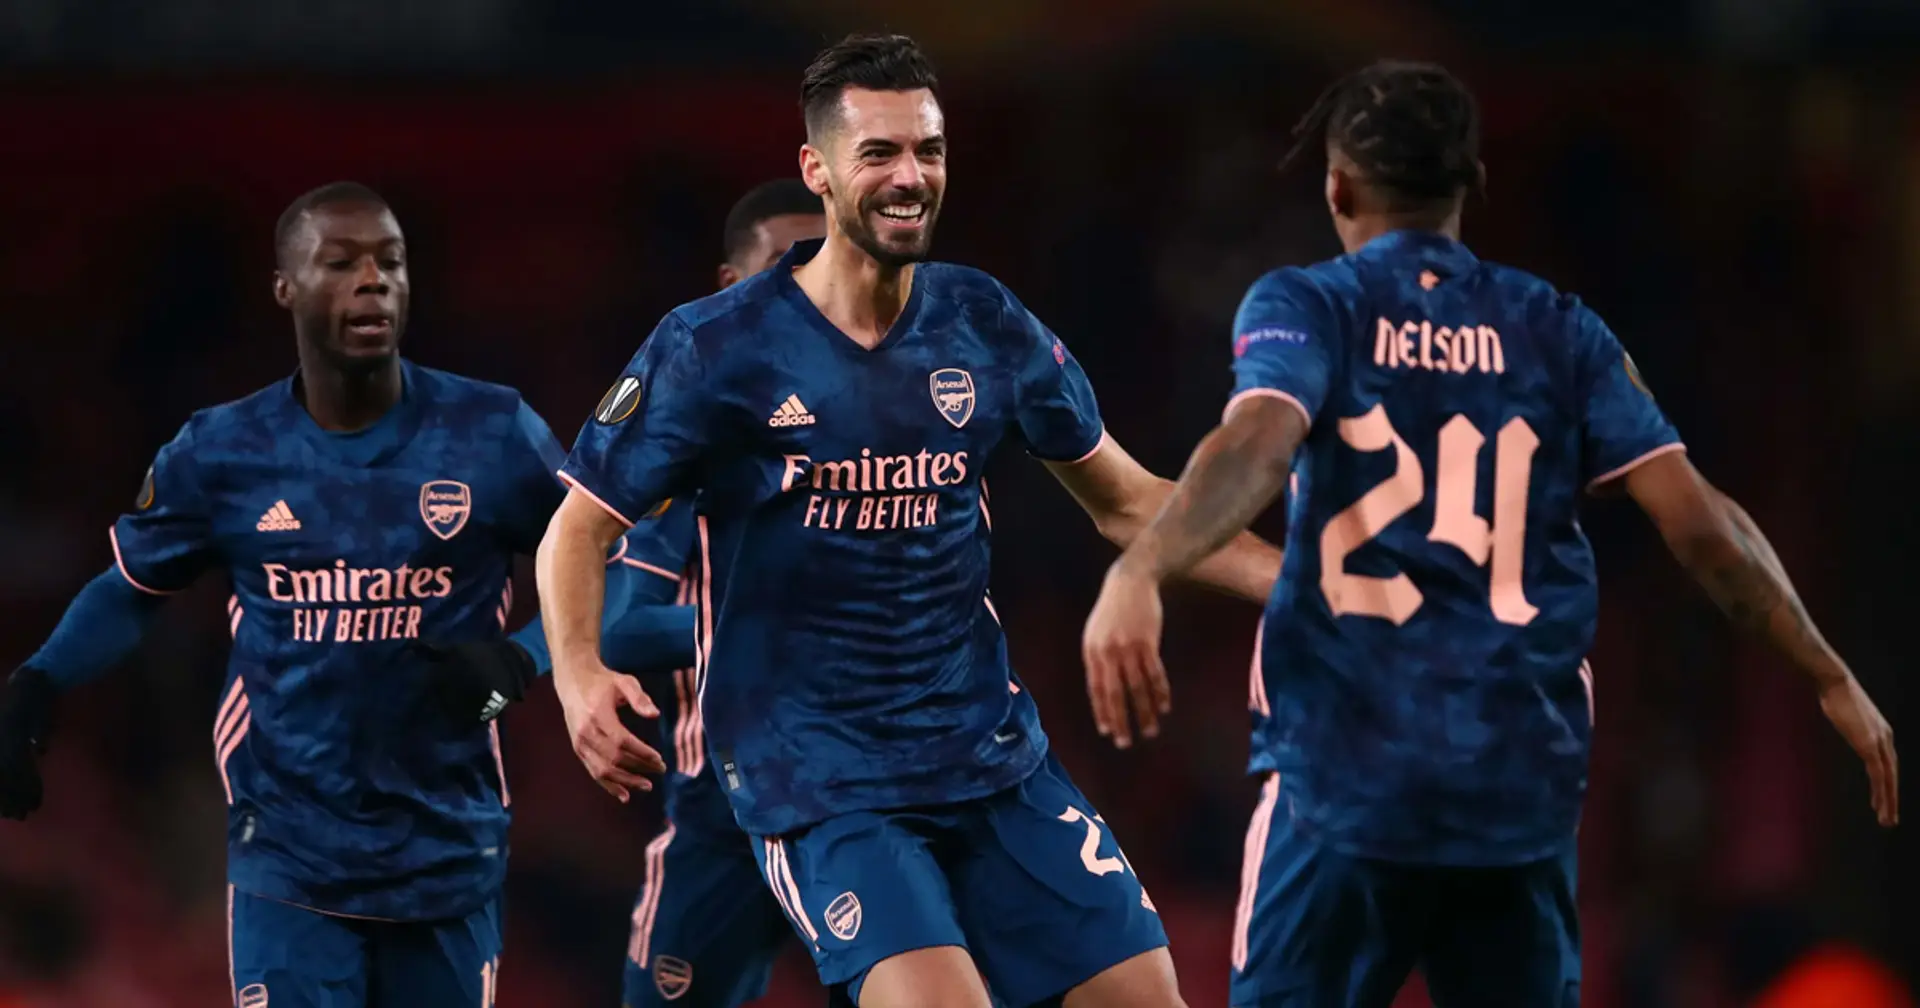 One curious stat about Arsenal's European campaign so far - Gunners only achieved it once before